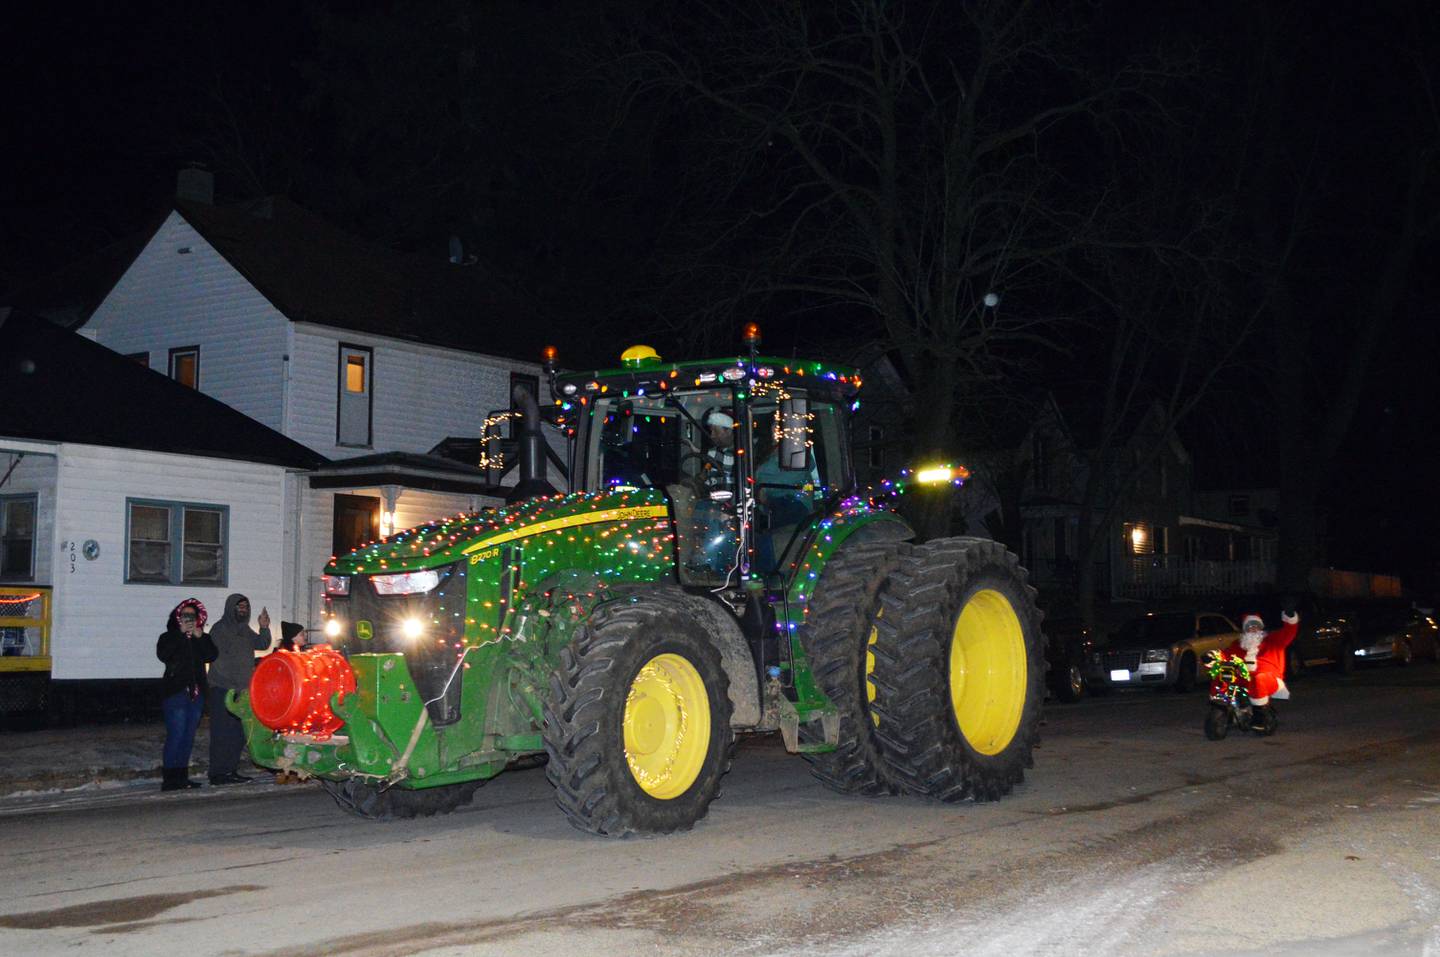 An entry in the Leaf River Lighted Christmas Parade drives down Main Street in the village on Dec. 17. A meet-and-greet with Santa and Mrs. Claus followed the parade, which was part of Leaf River's Christmas festival.